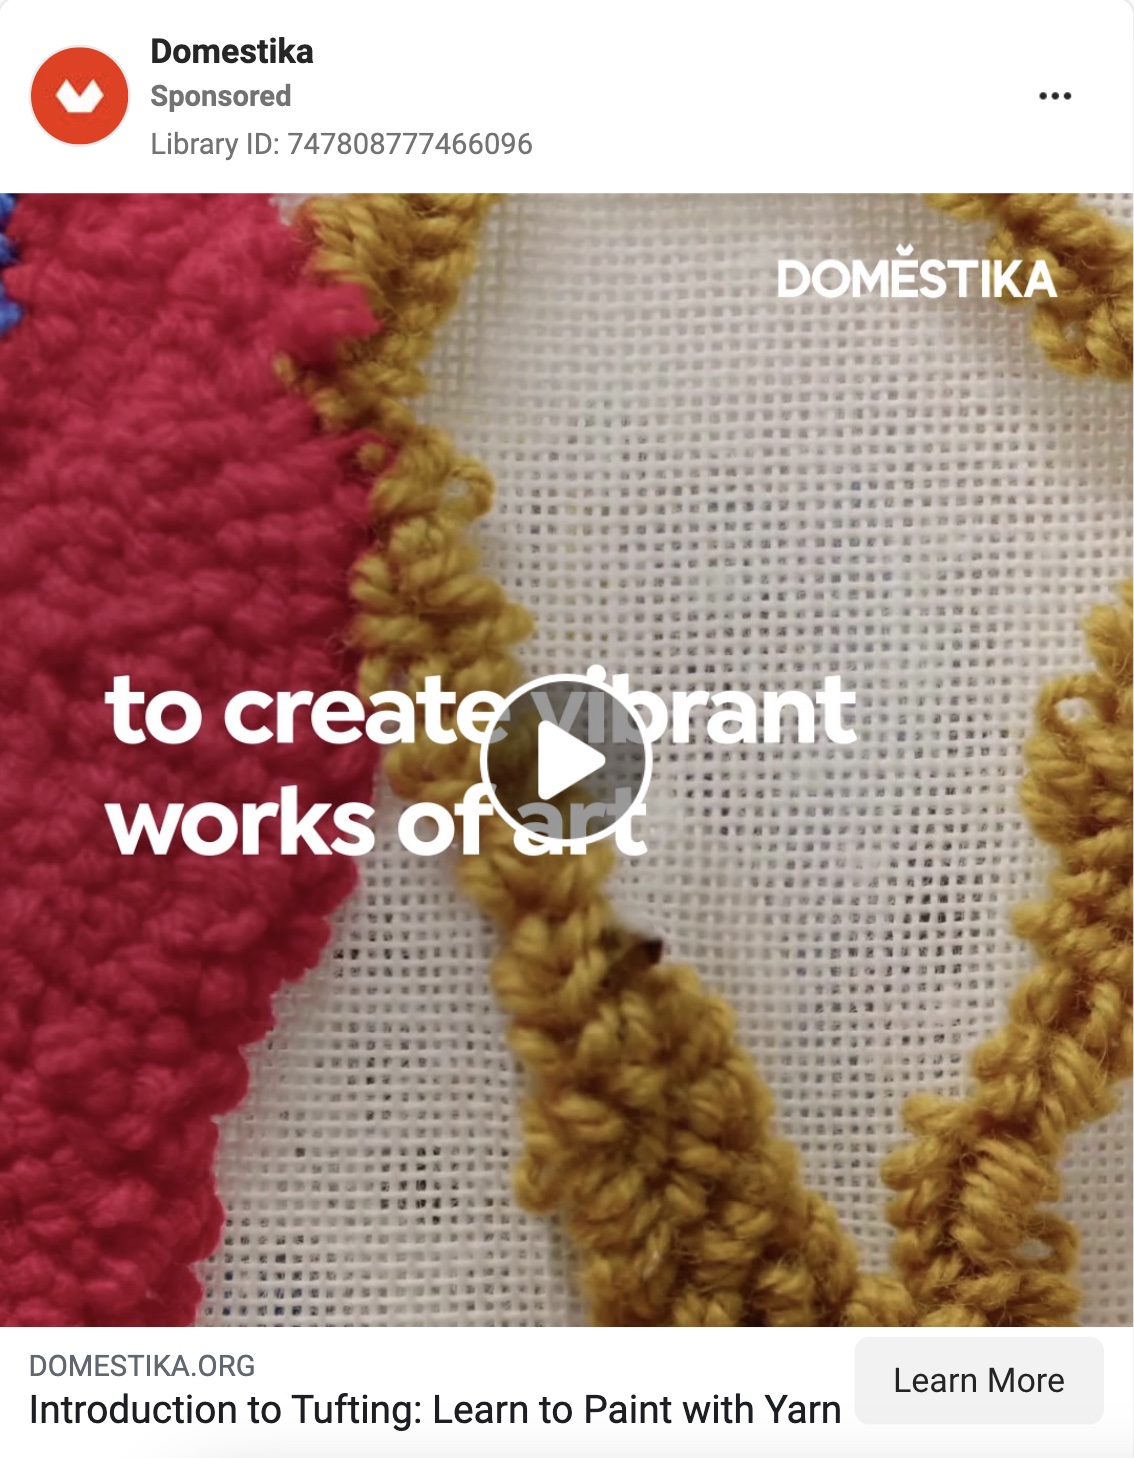 a Facebook video ad featuring a Domestika online course